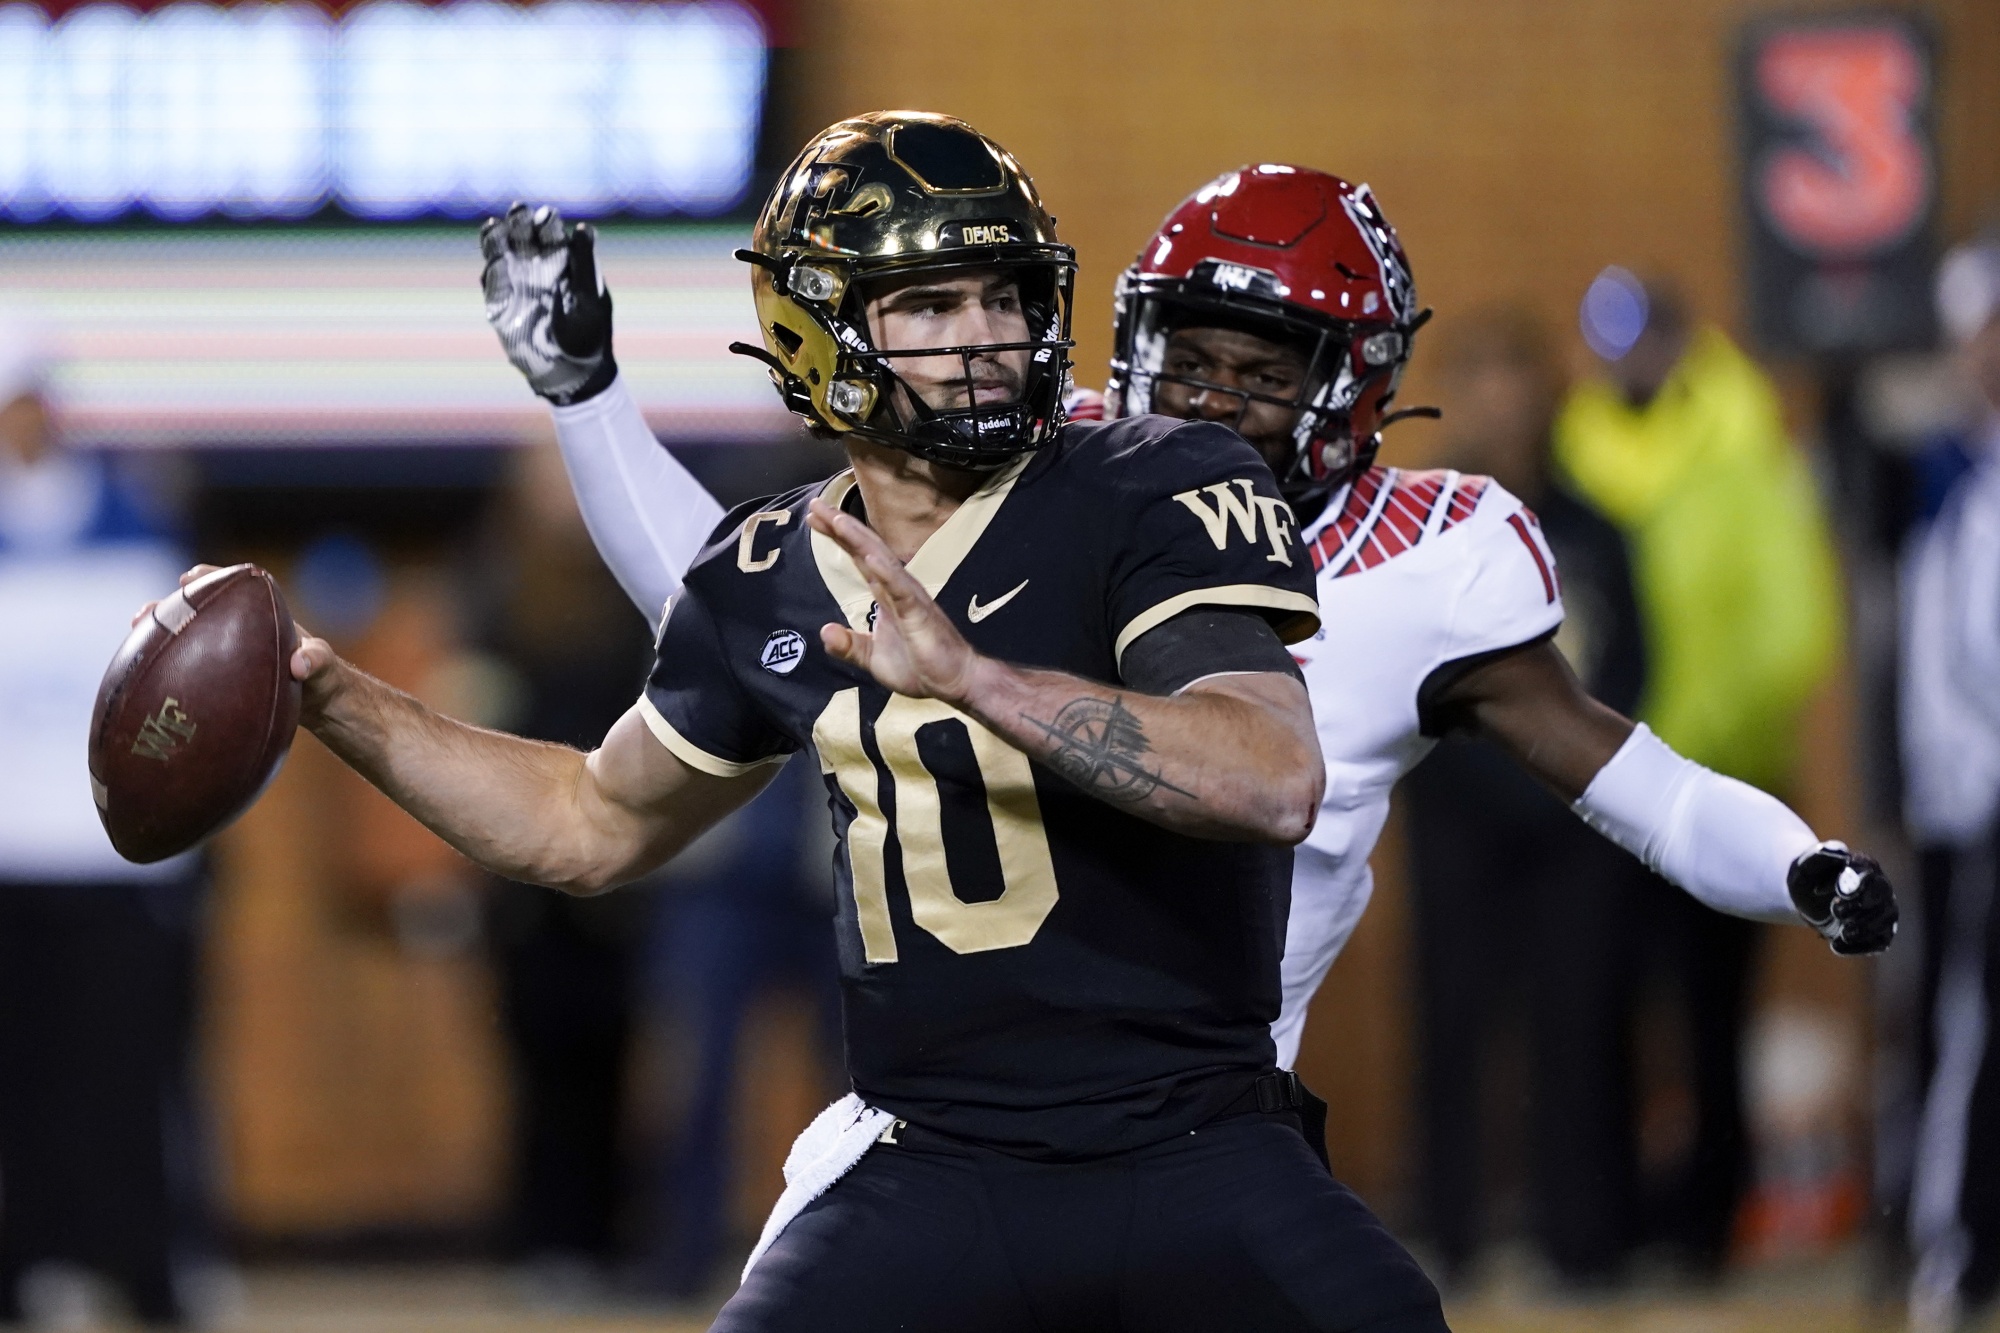 Wake Forest QB Hartman Out Indefinitely With Medical Issue Bloomberg